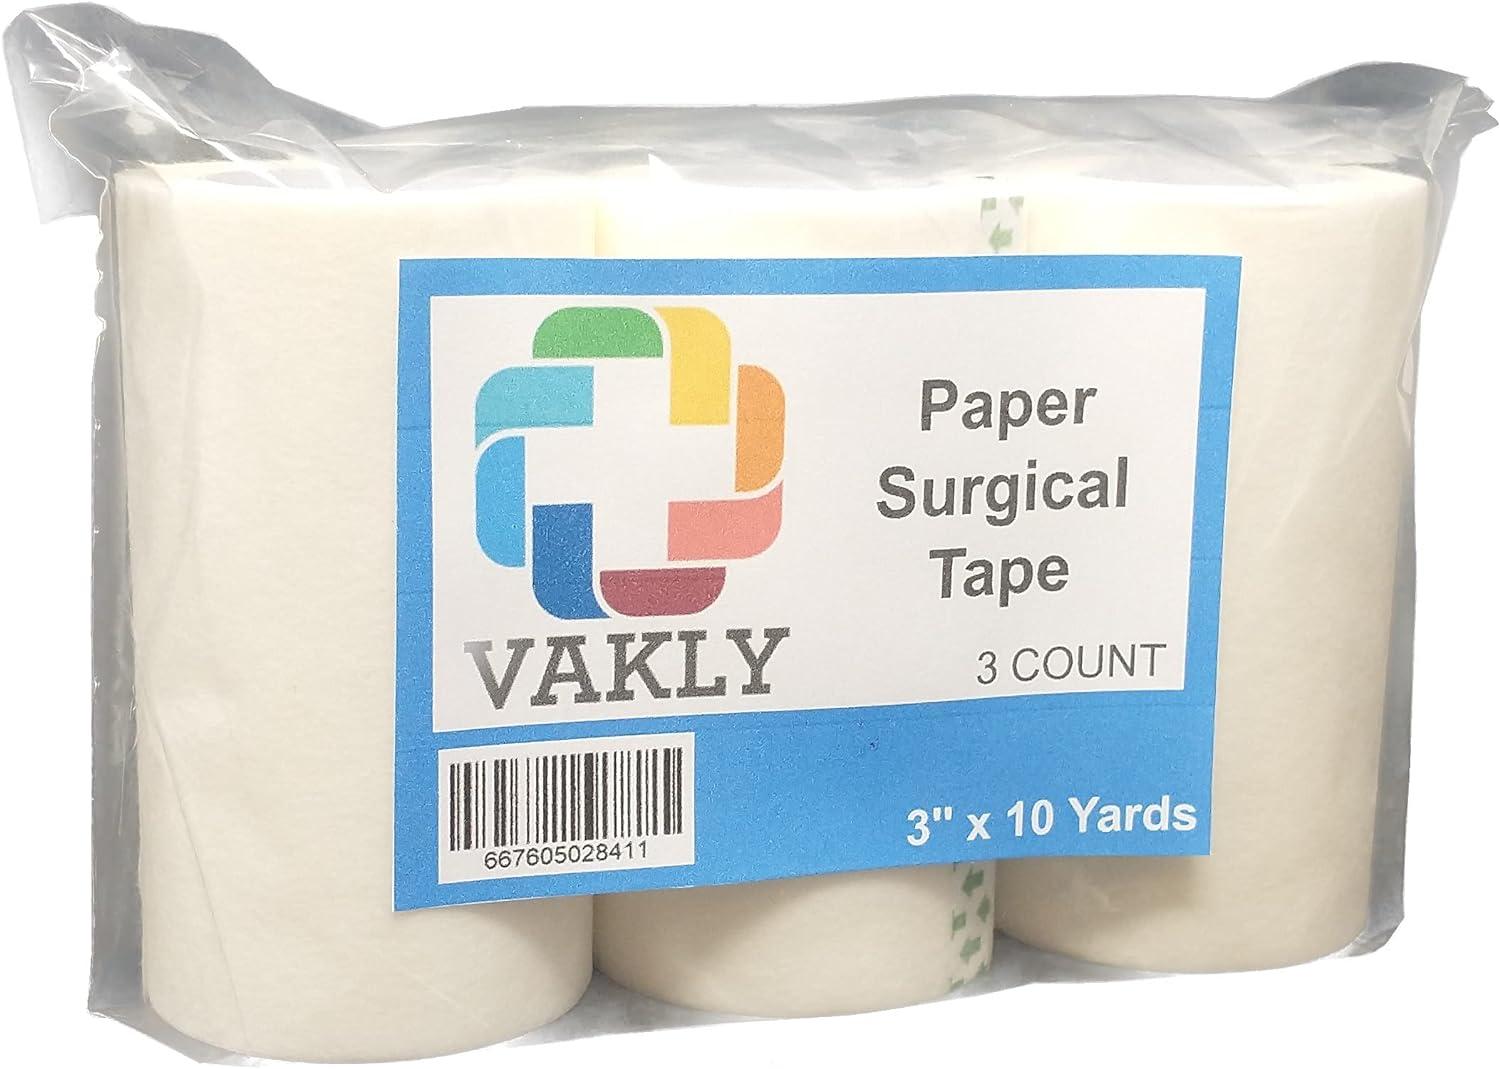 Vakly Paper Medical First Aid Surgical Tape 1 x 10 Yards [Pack of 6 Rolls] Lightweight Breathable Microporous Self Adhesive Latex Free Hypoallergenic